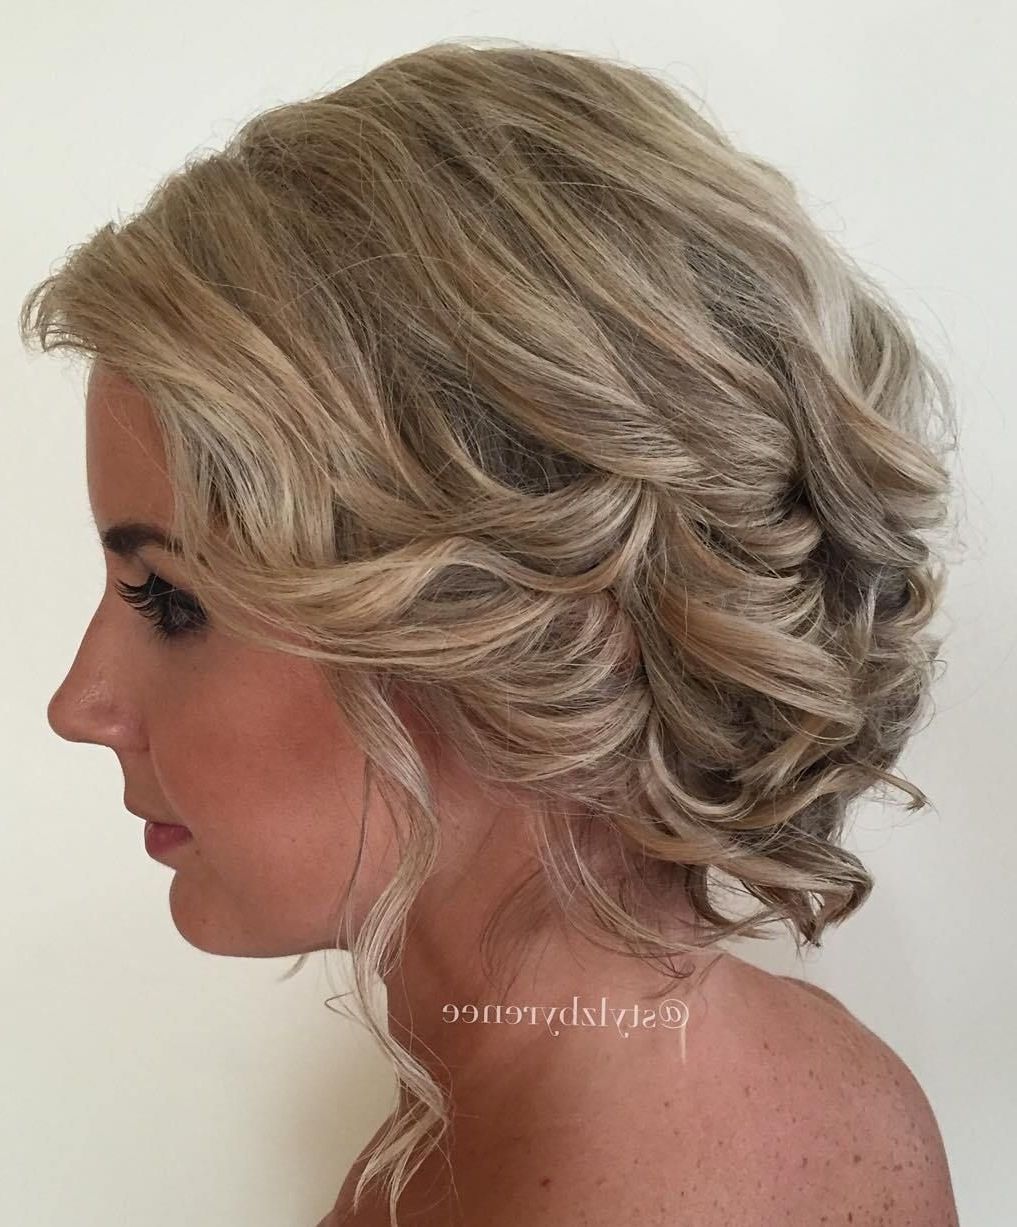 40 Best Short Wedding Hairstyles That Make You Say “wow!” | Updo Inside Wedding Hairstyles For Short Hair Updos (View 13 of 15)